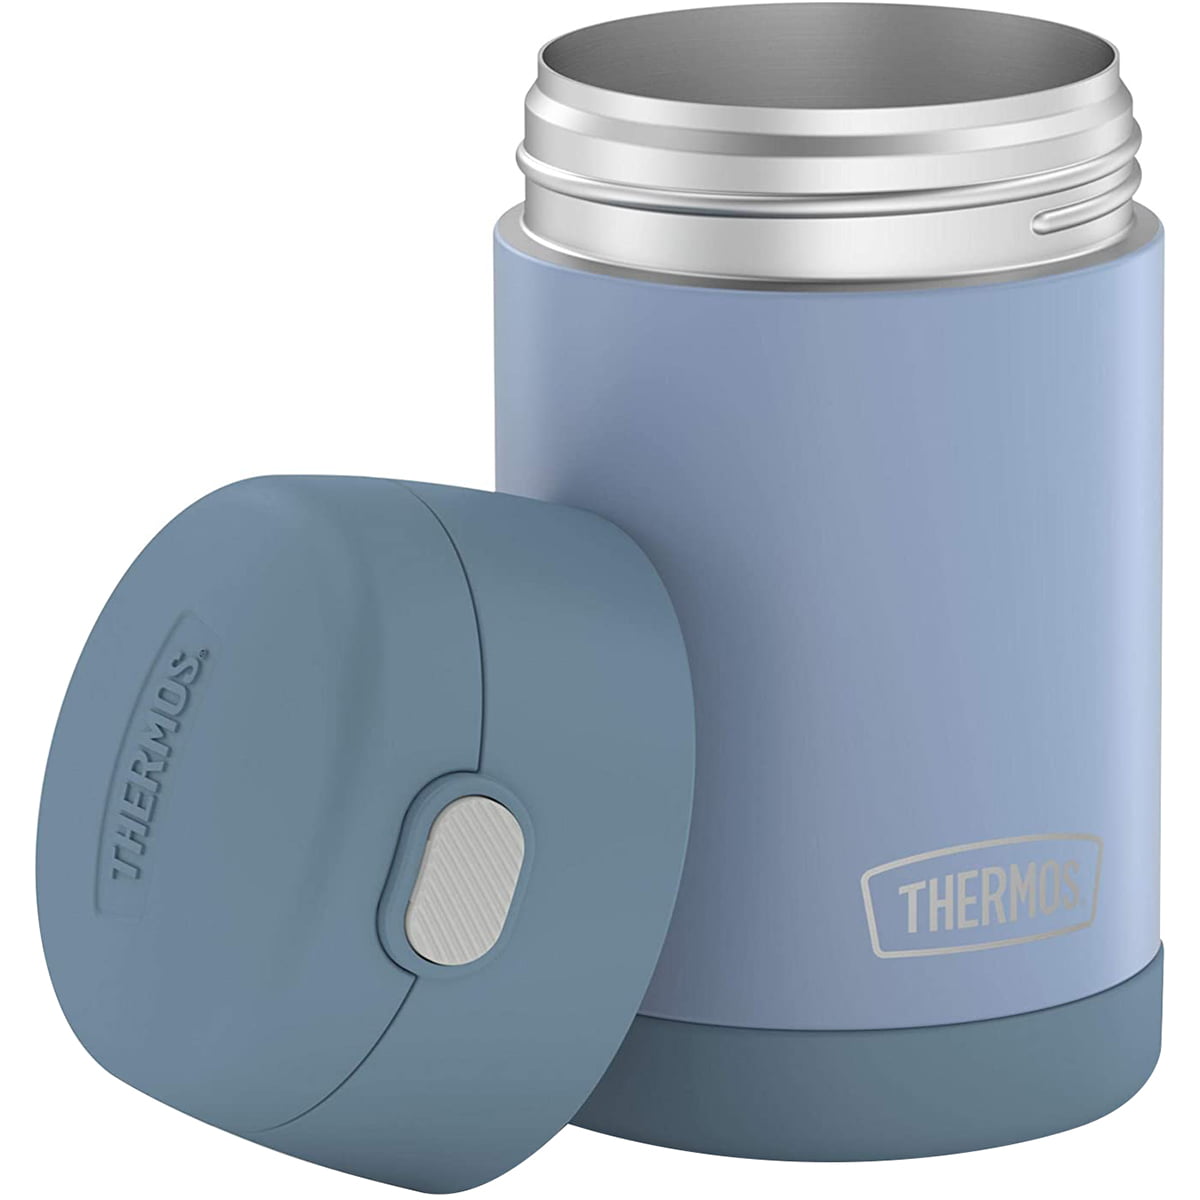  DaCool Food Thermos for Kids With Handle 16 Ounce